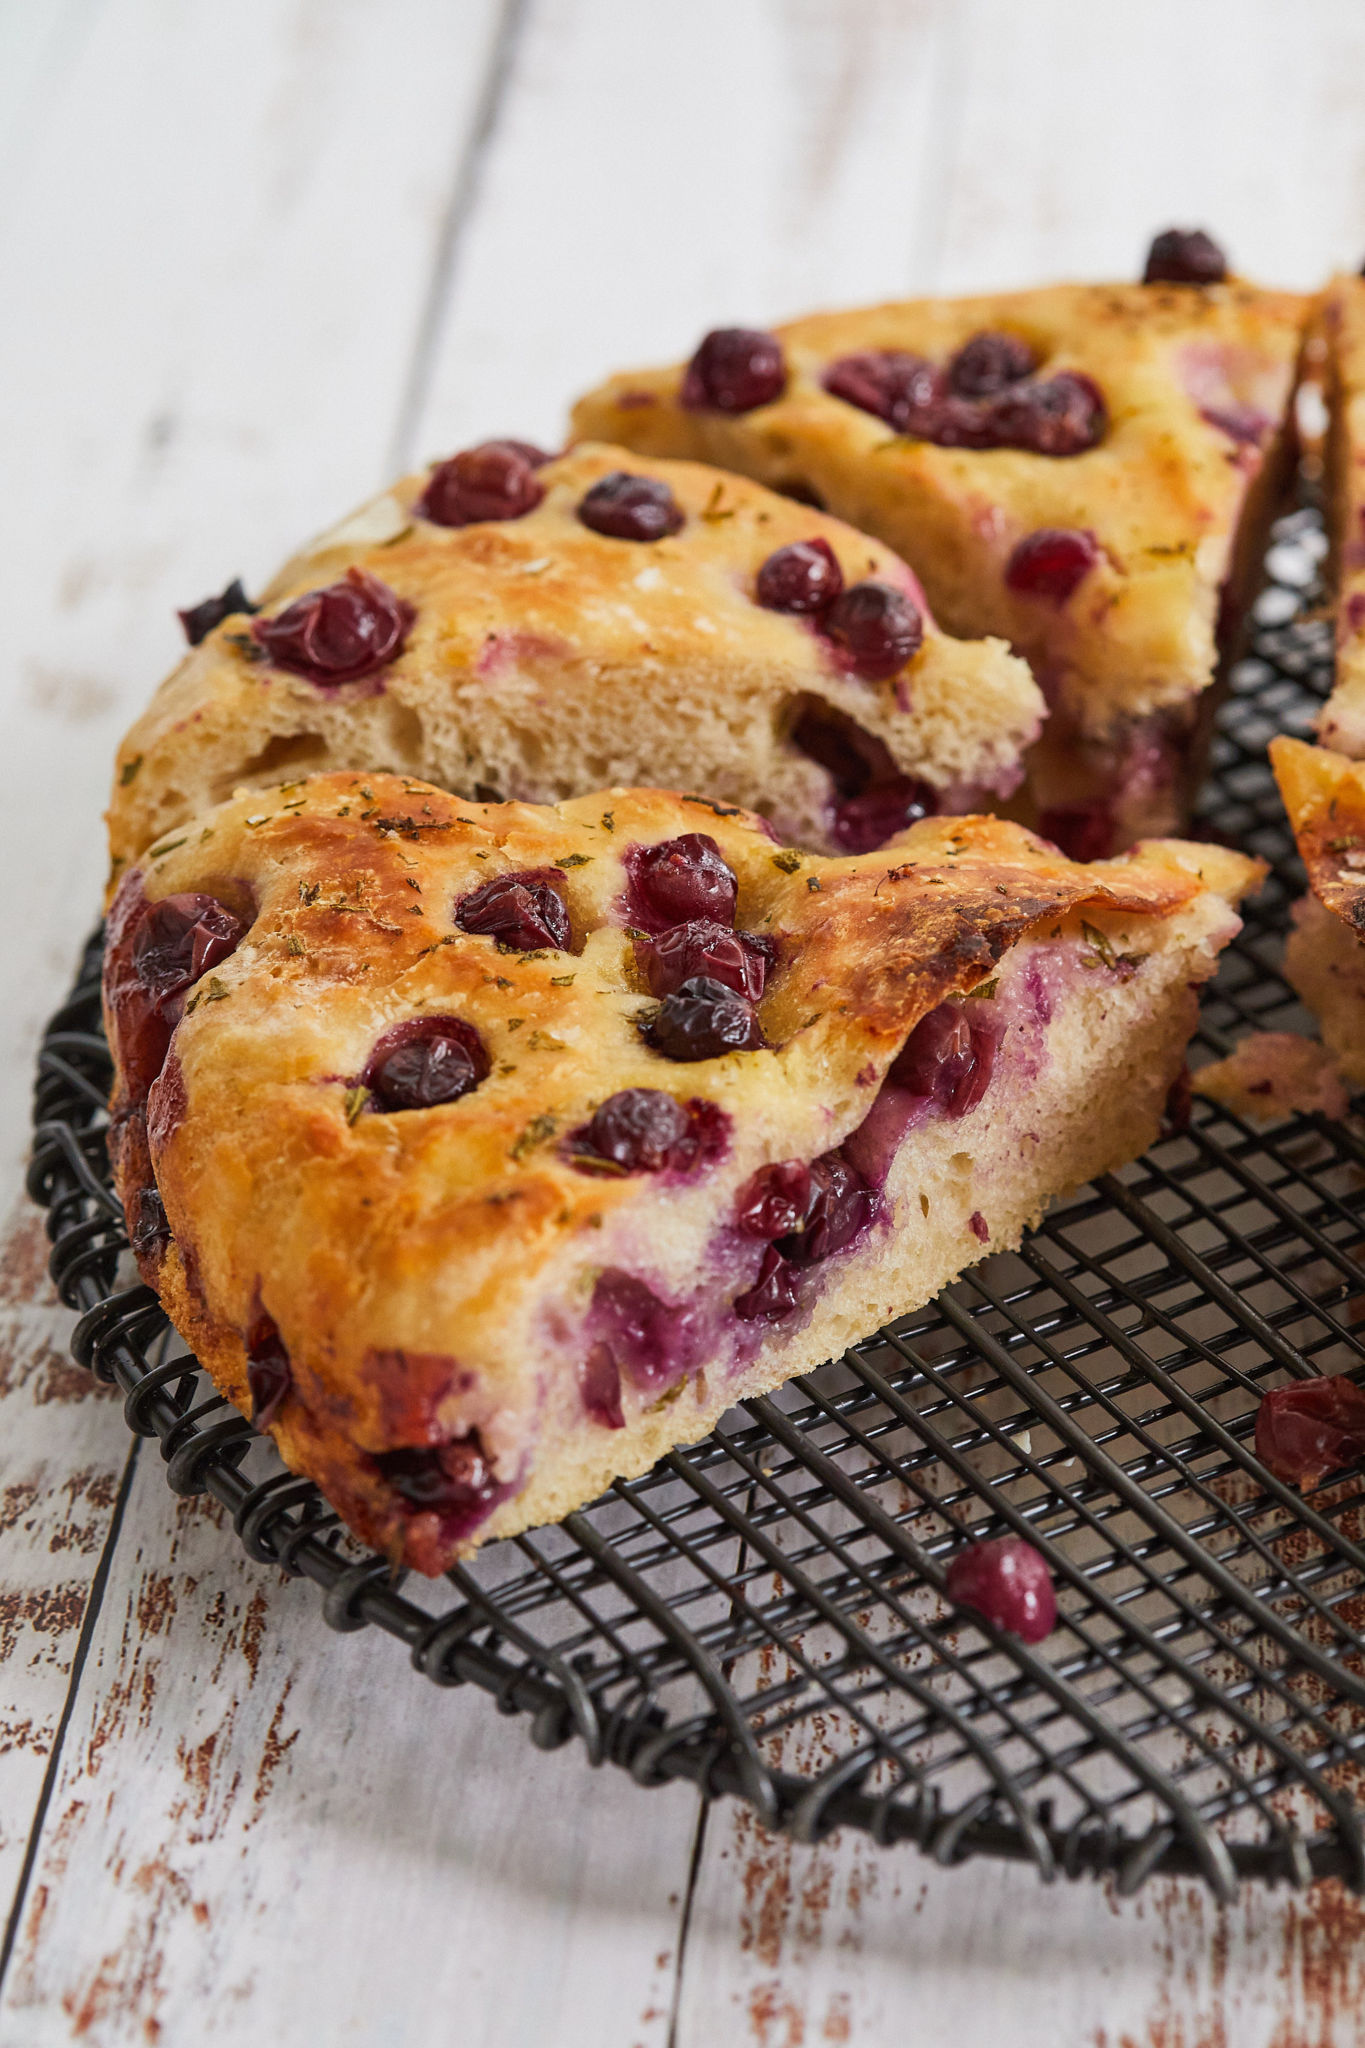 A close of up my grape and rosemary focaccia recipe, showing grapes and interior texture.